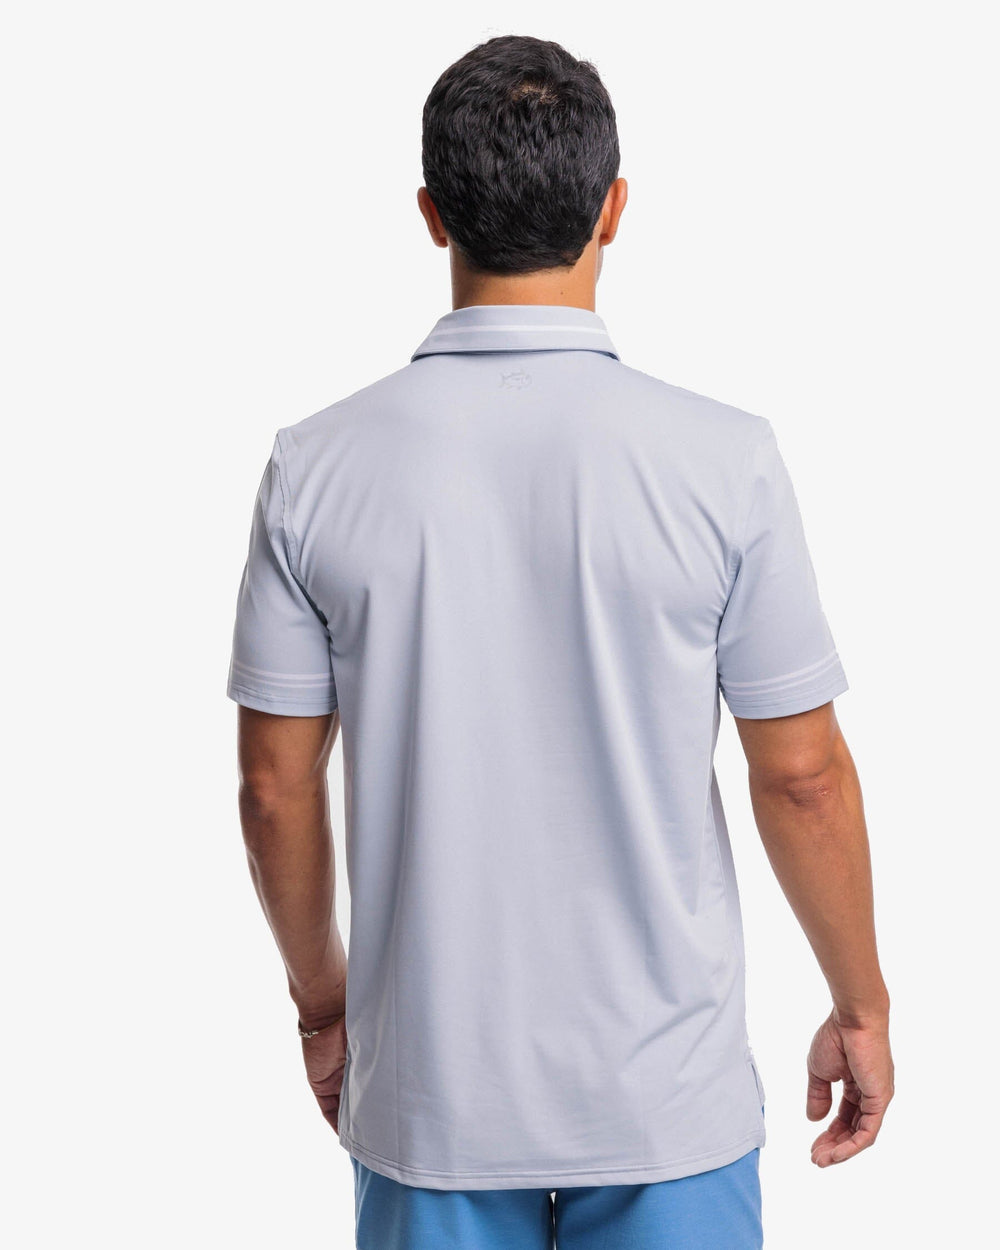 The back view of the Southern Tide Driver Brantley Stripe Performance Polo Shirt by Southern Tide - Slate Grey